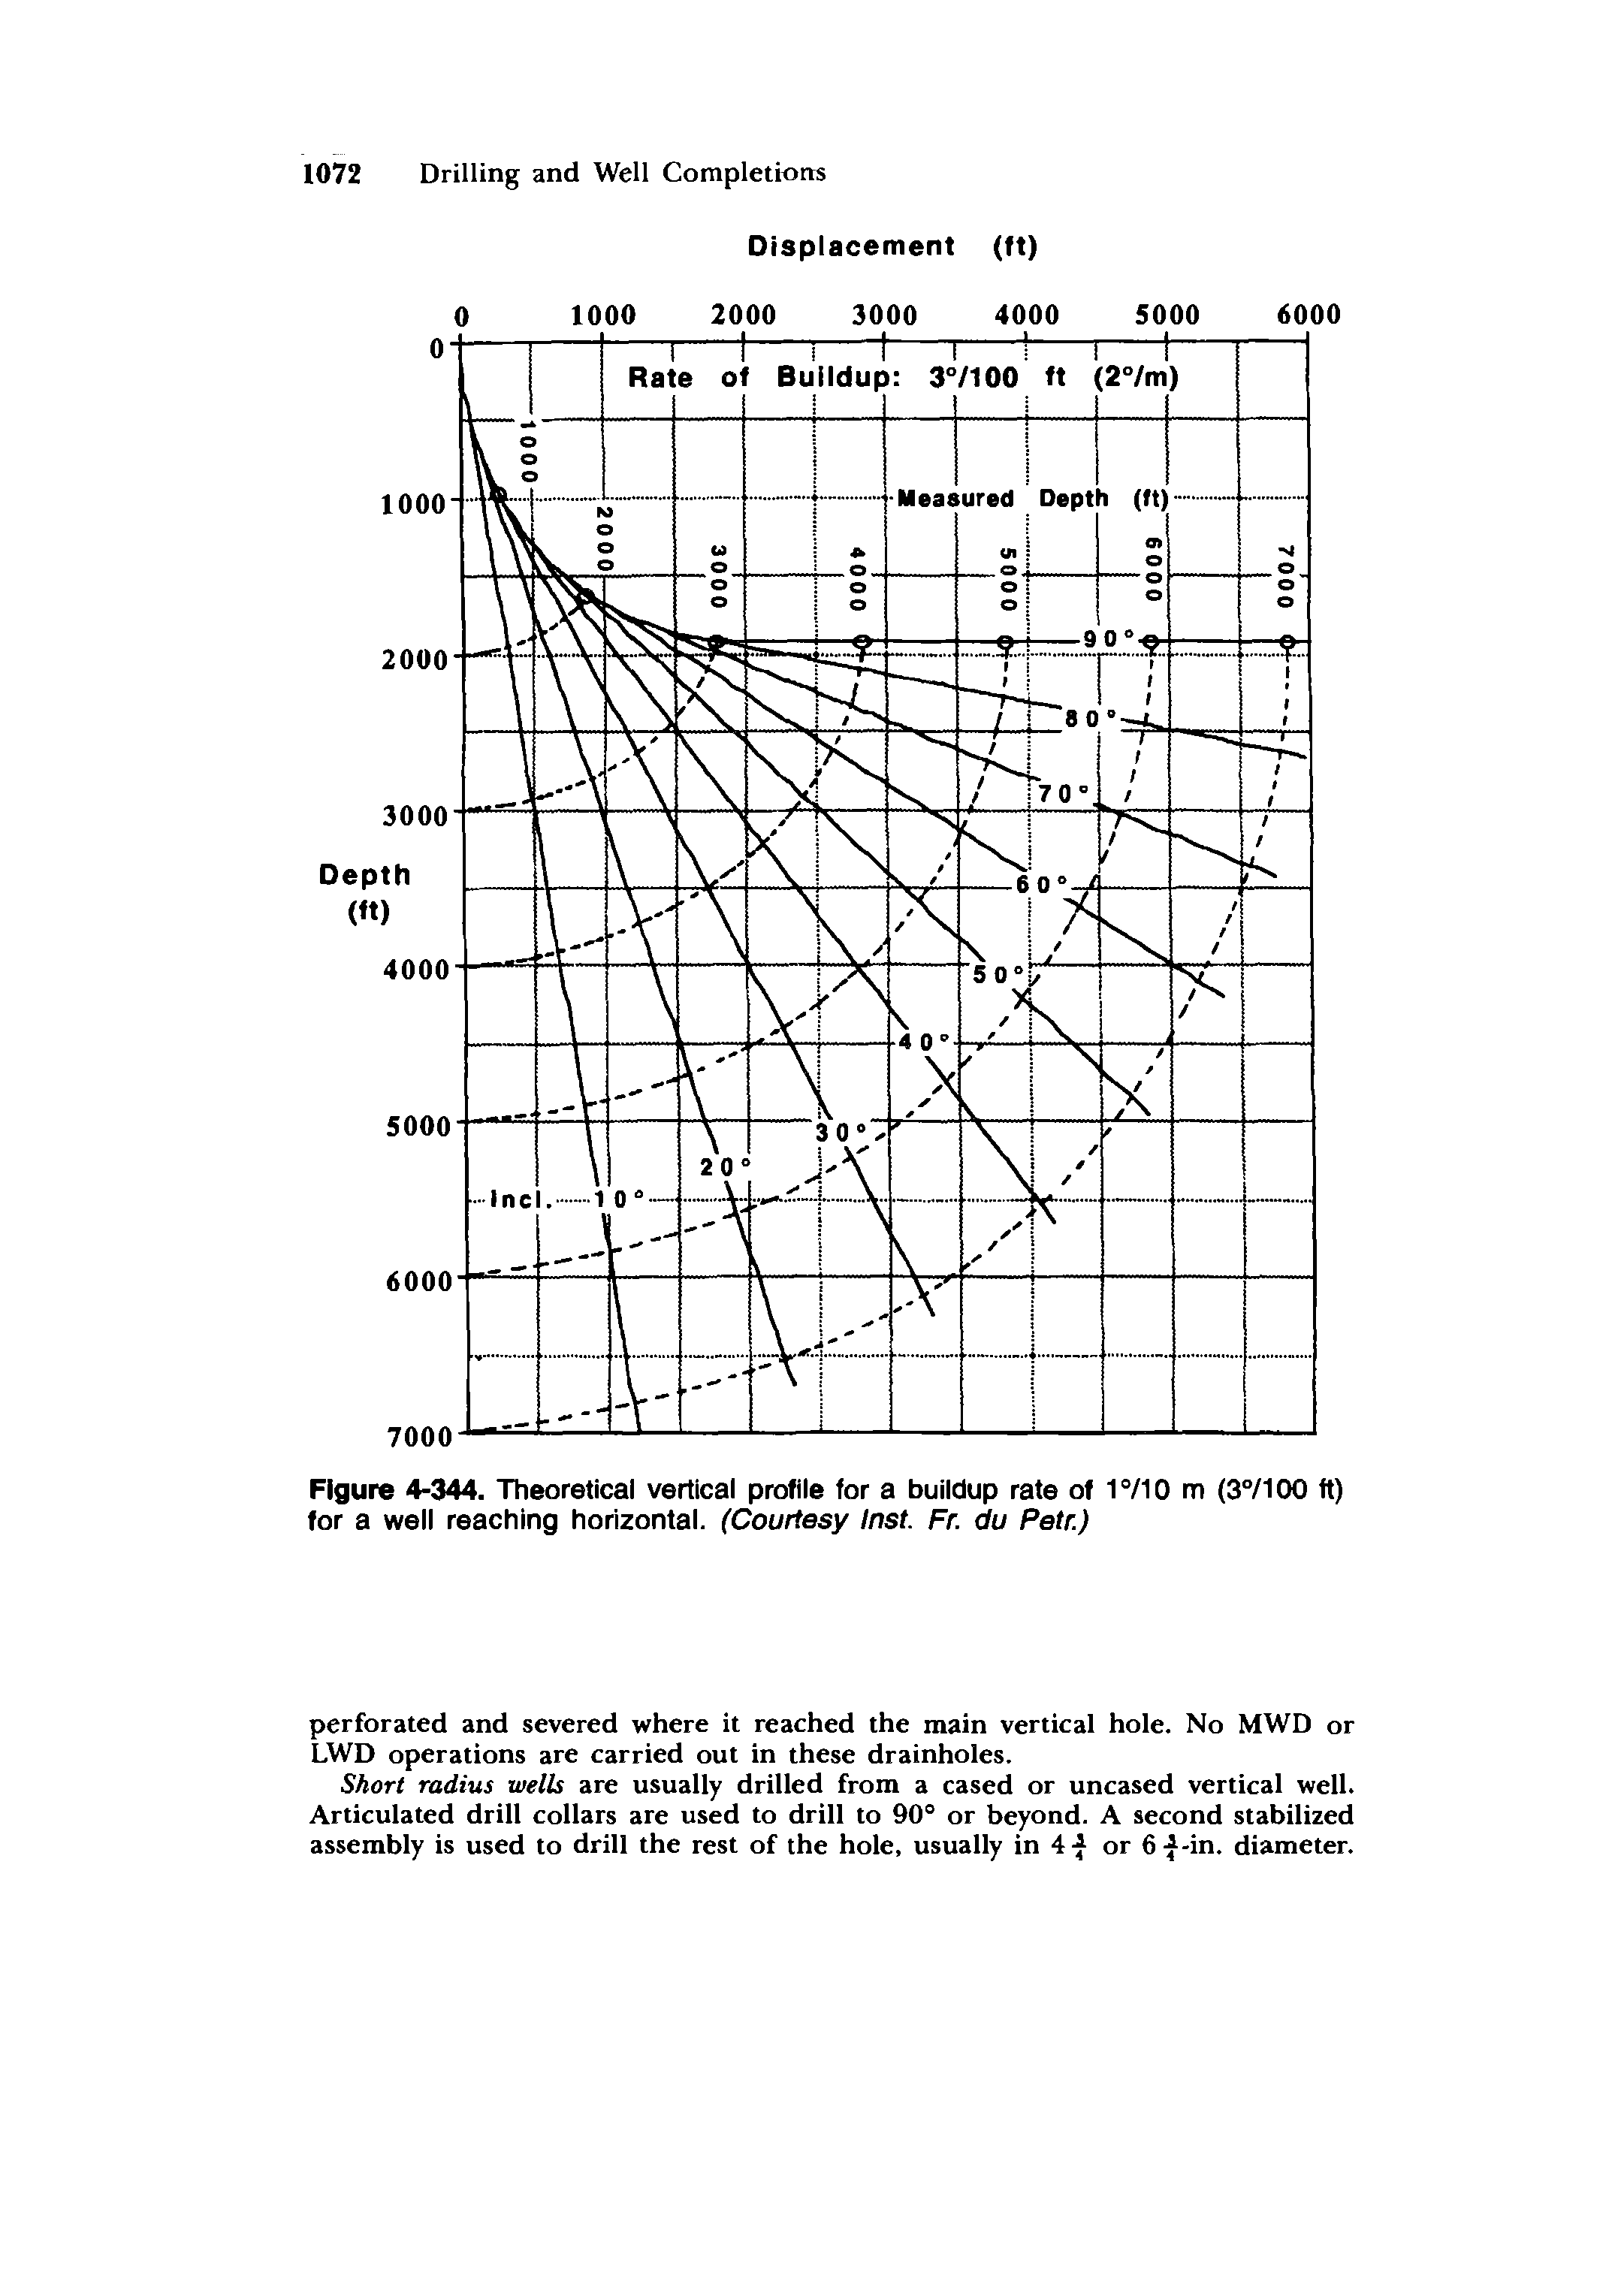 Figure 4-344. Theoretical vertical profile for a buildup rate of 1°/10 m (37100 ft) for a well reaching horizontal. (Courtesy Inst. Fr. du Petr.)...